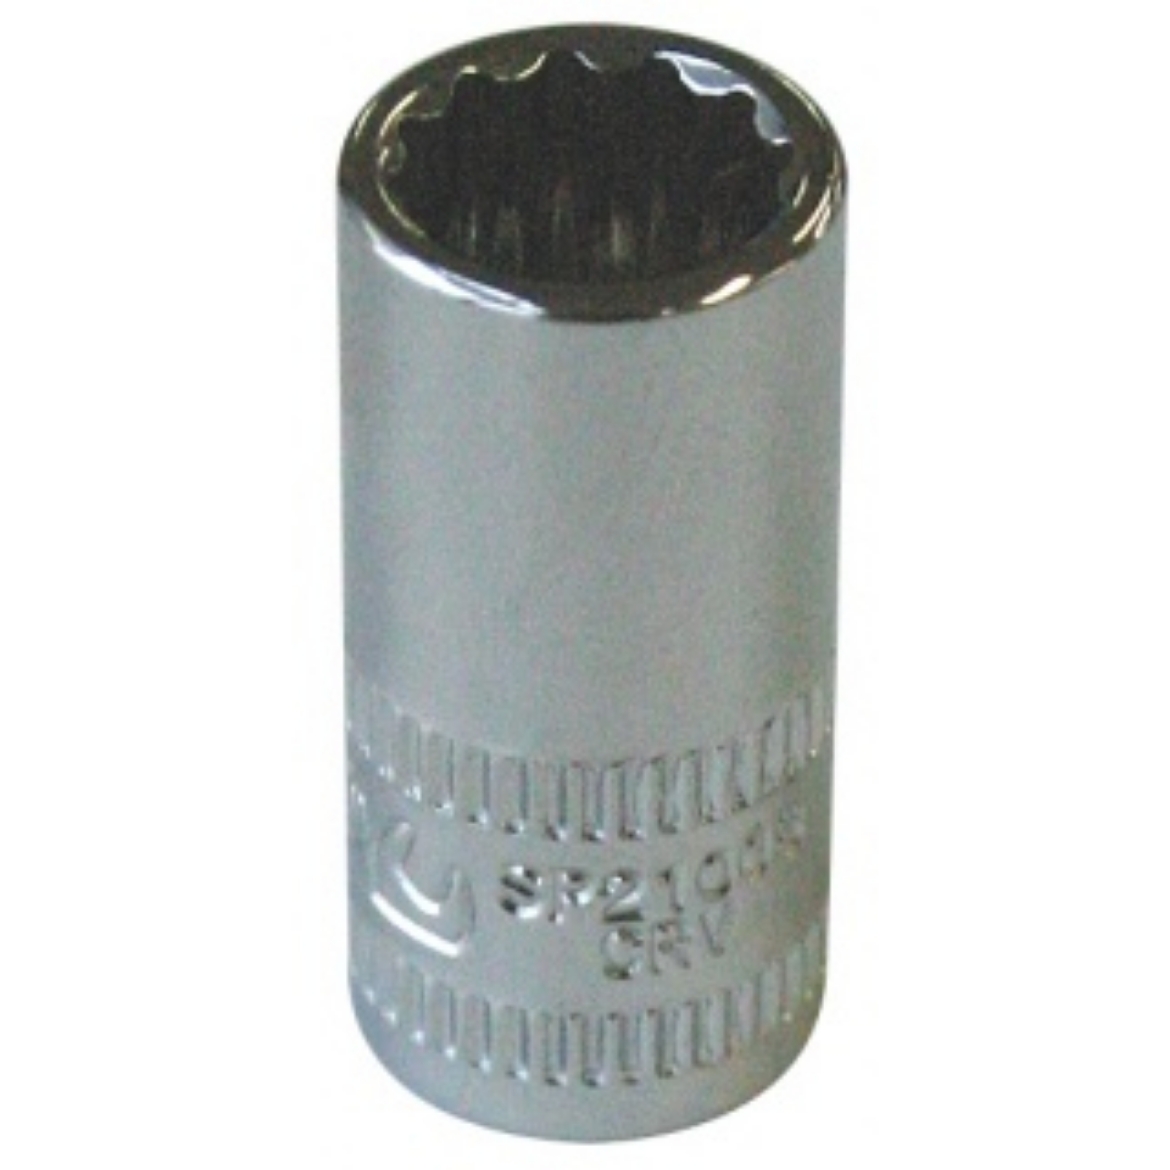 Picture of SOCKET 1/4 "DR 12 PT METRIC 10MM SP TOOLS